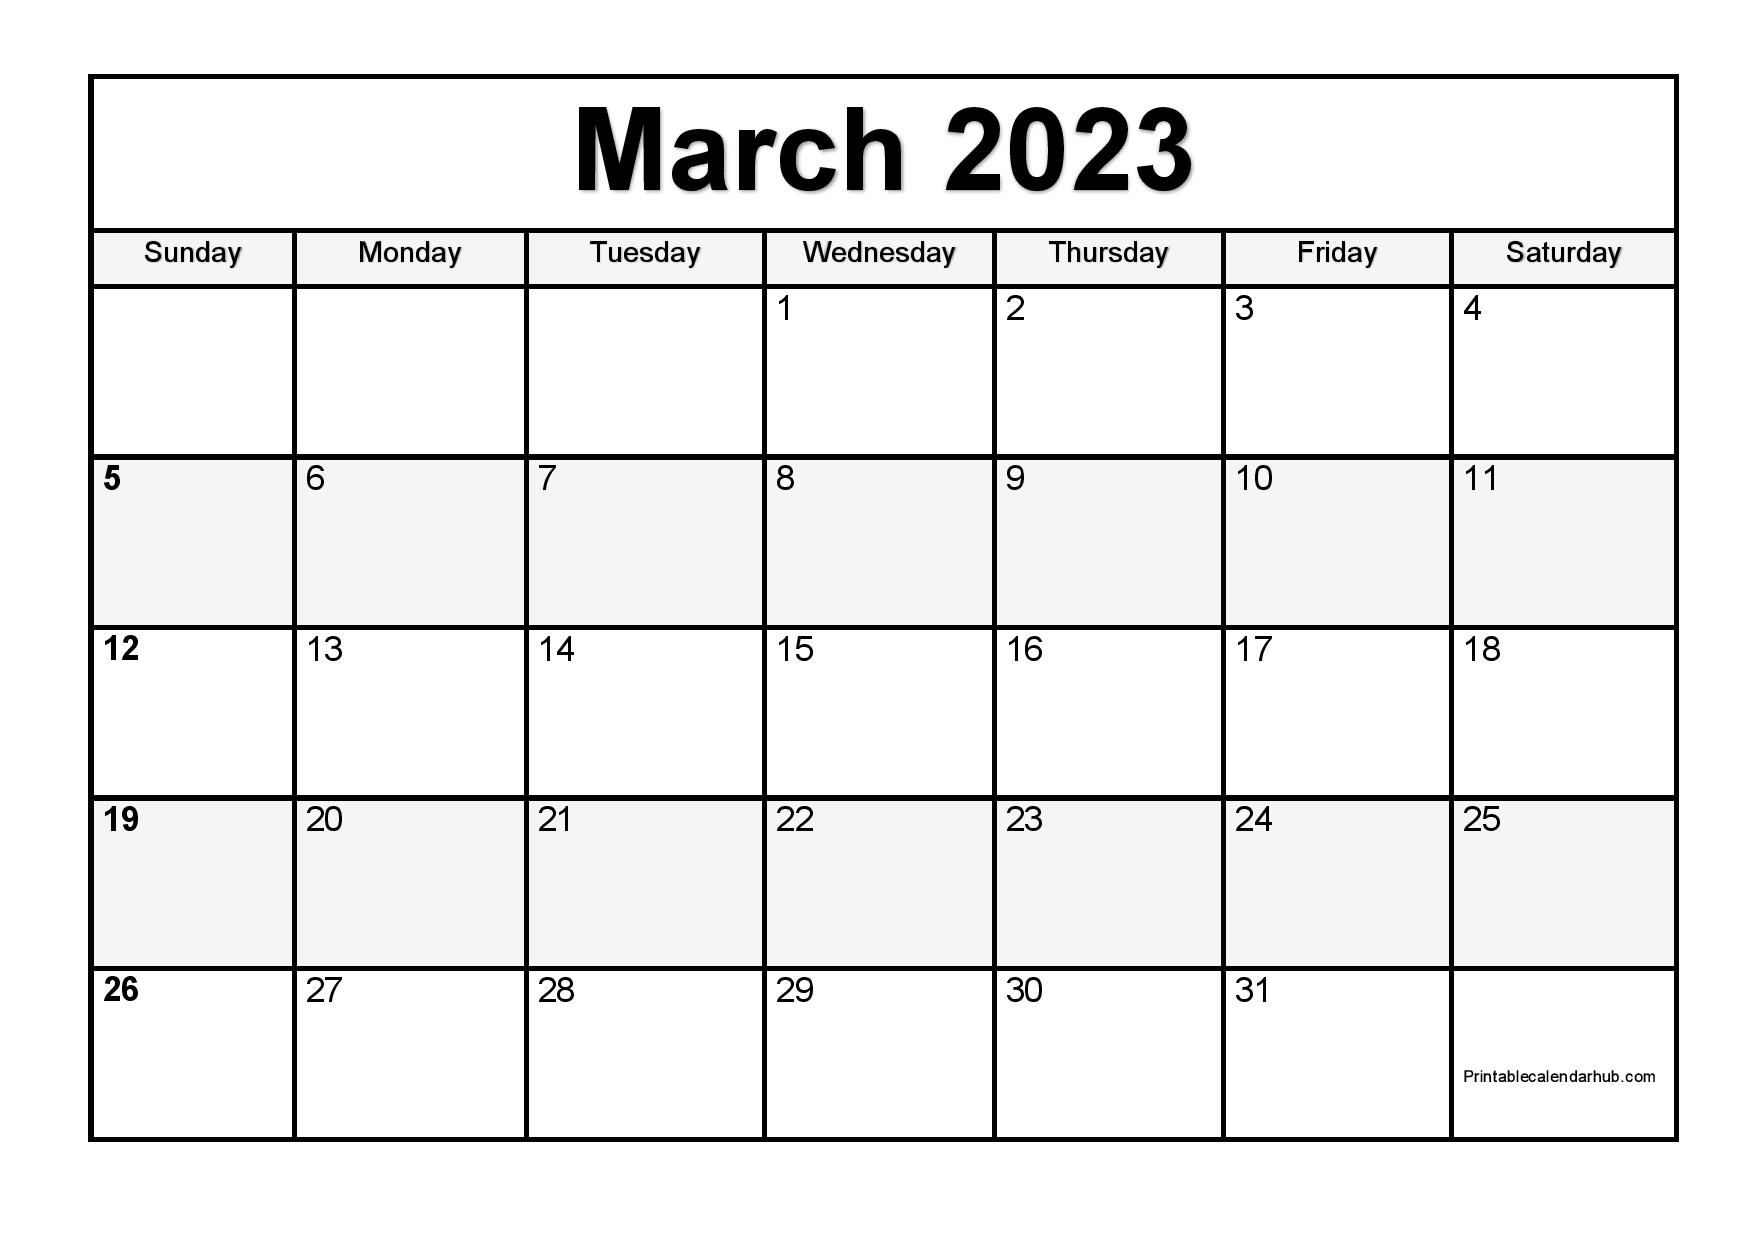 Is There A Printable Calendar In Word